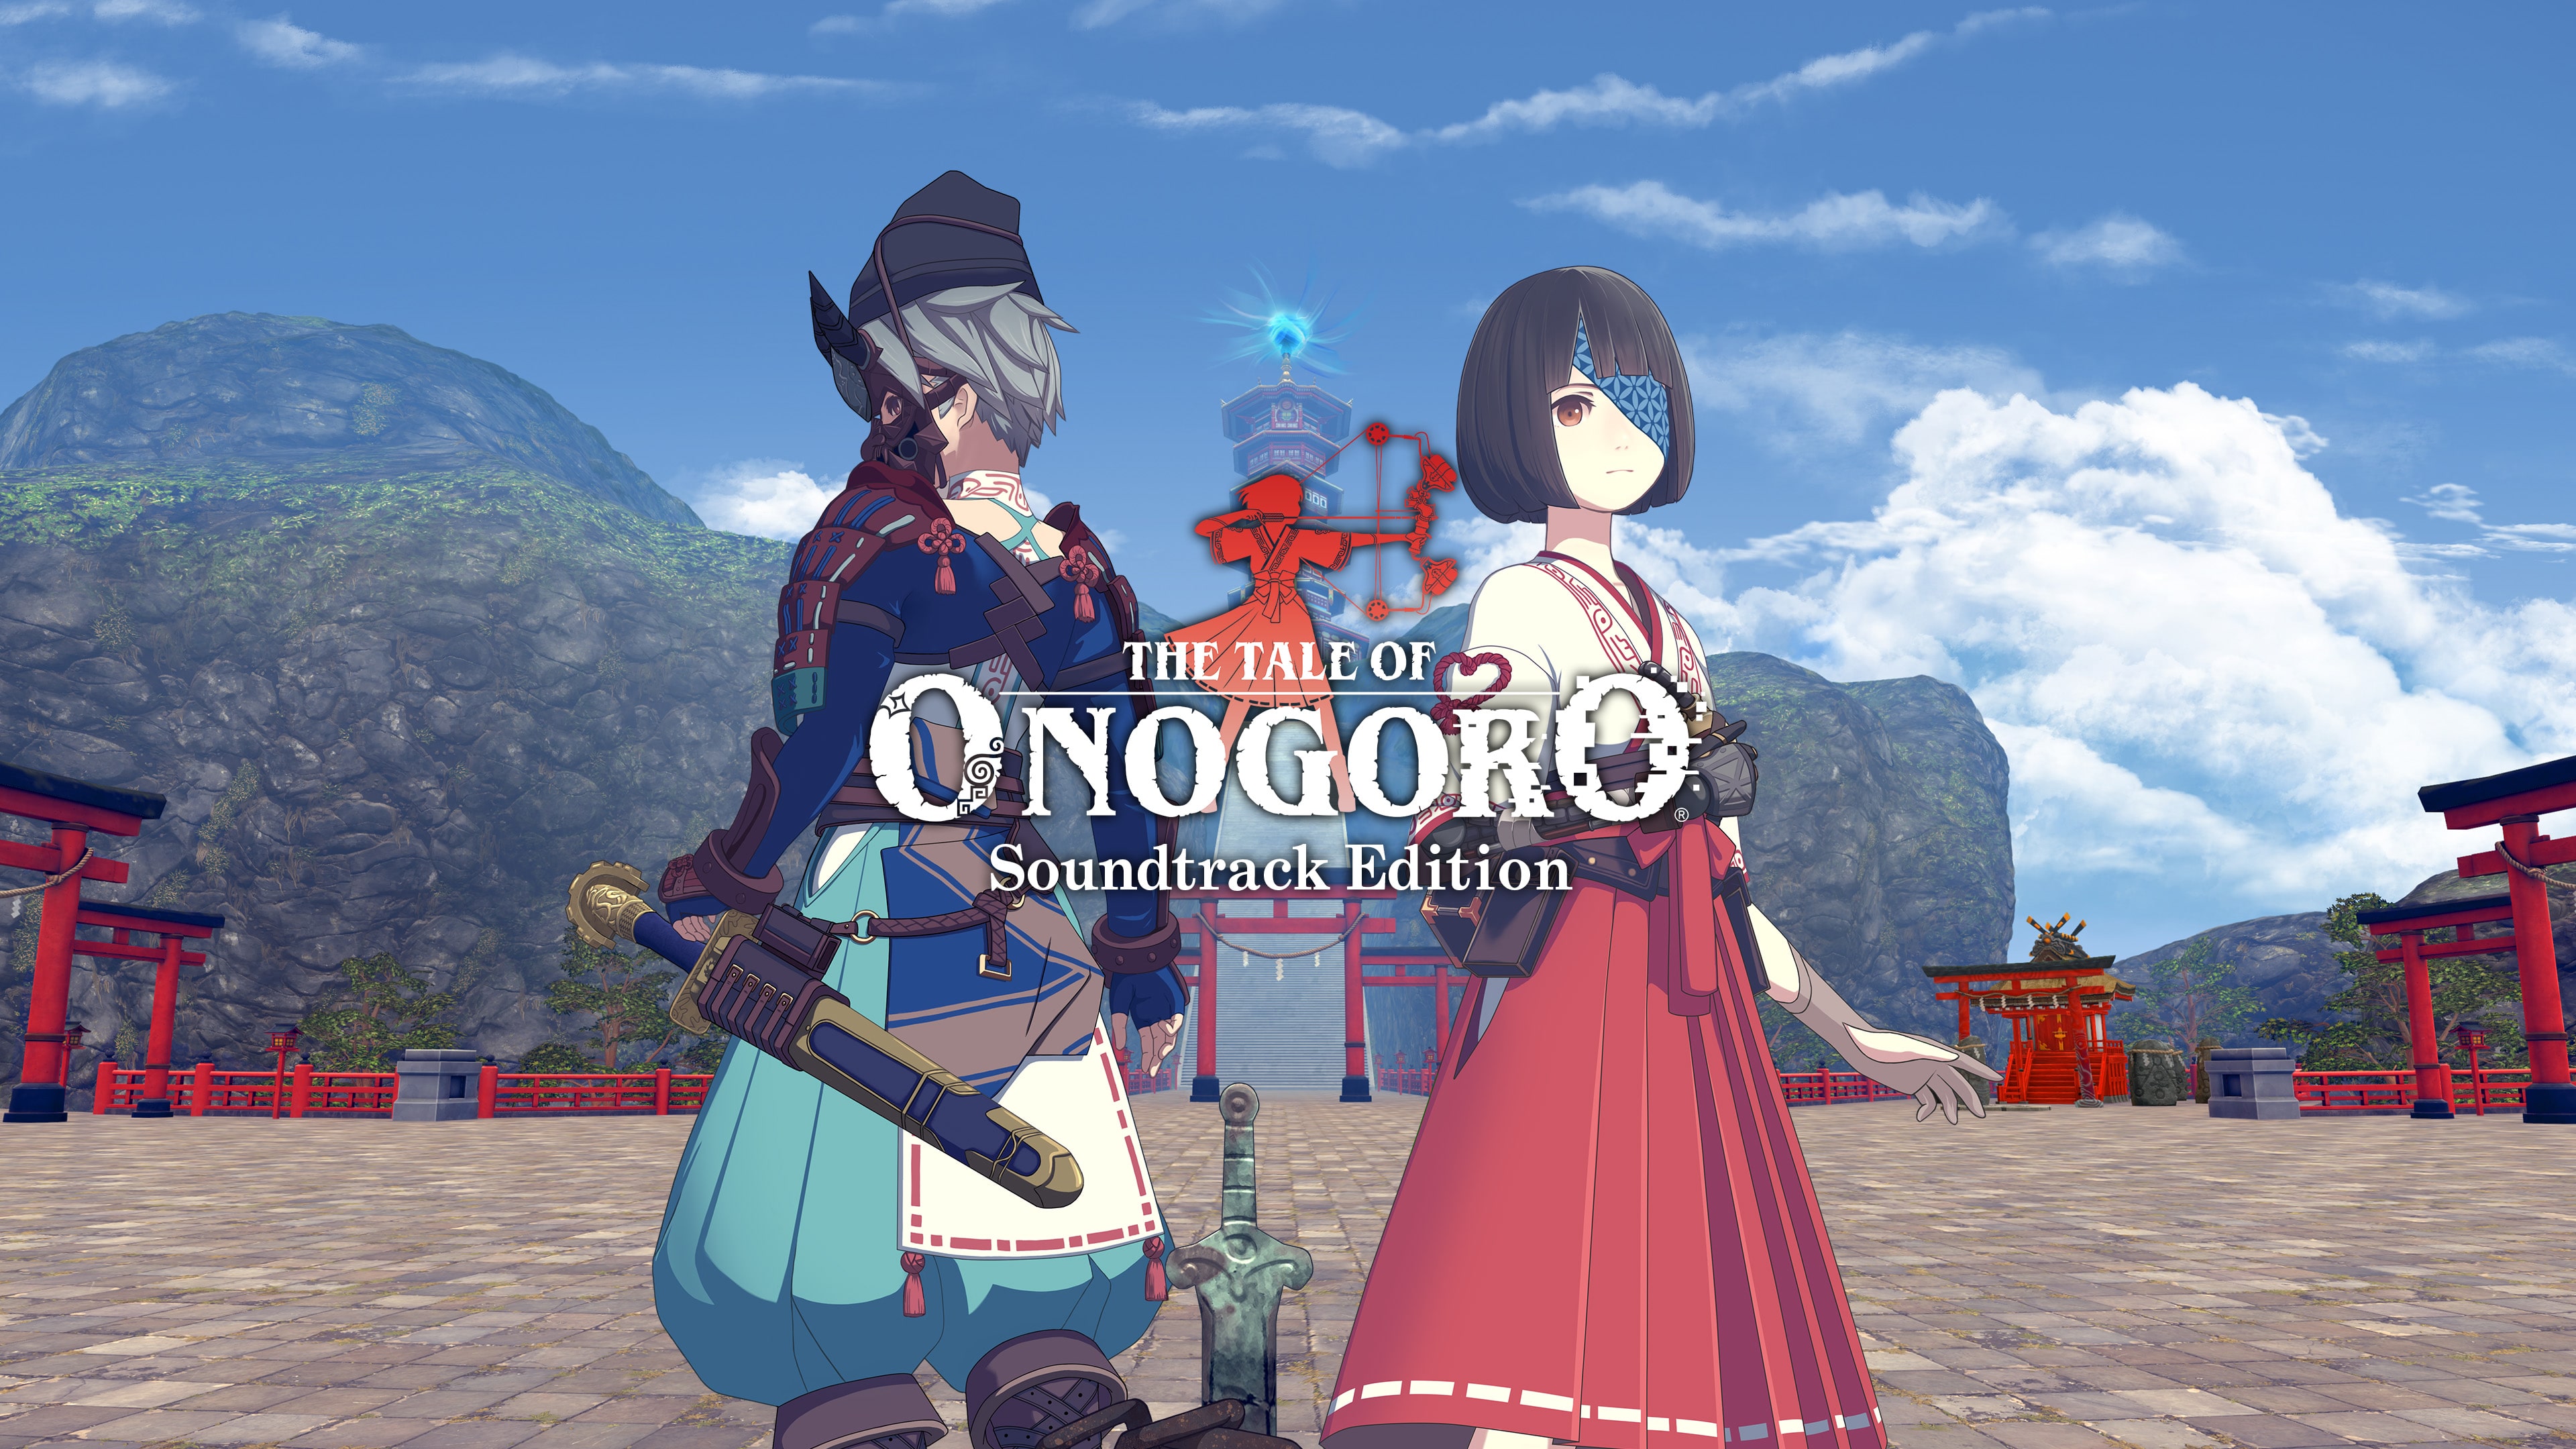 The Tale of Onogoro Soundtrack Edition (Simplified Chinese, English, Korean, Japanese)